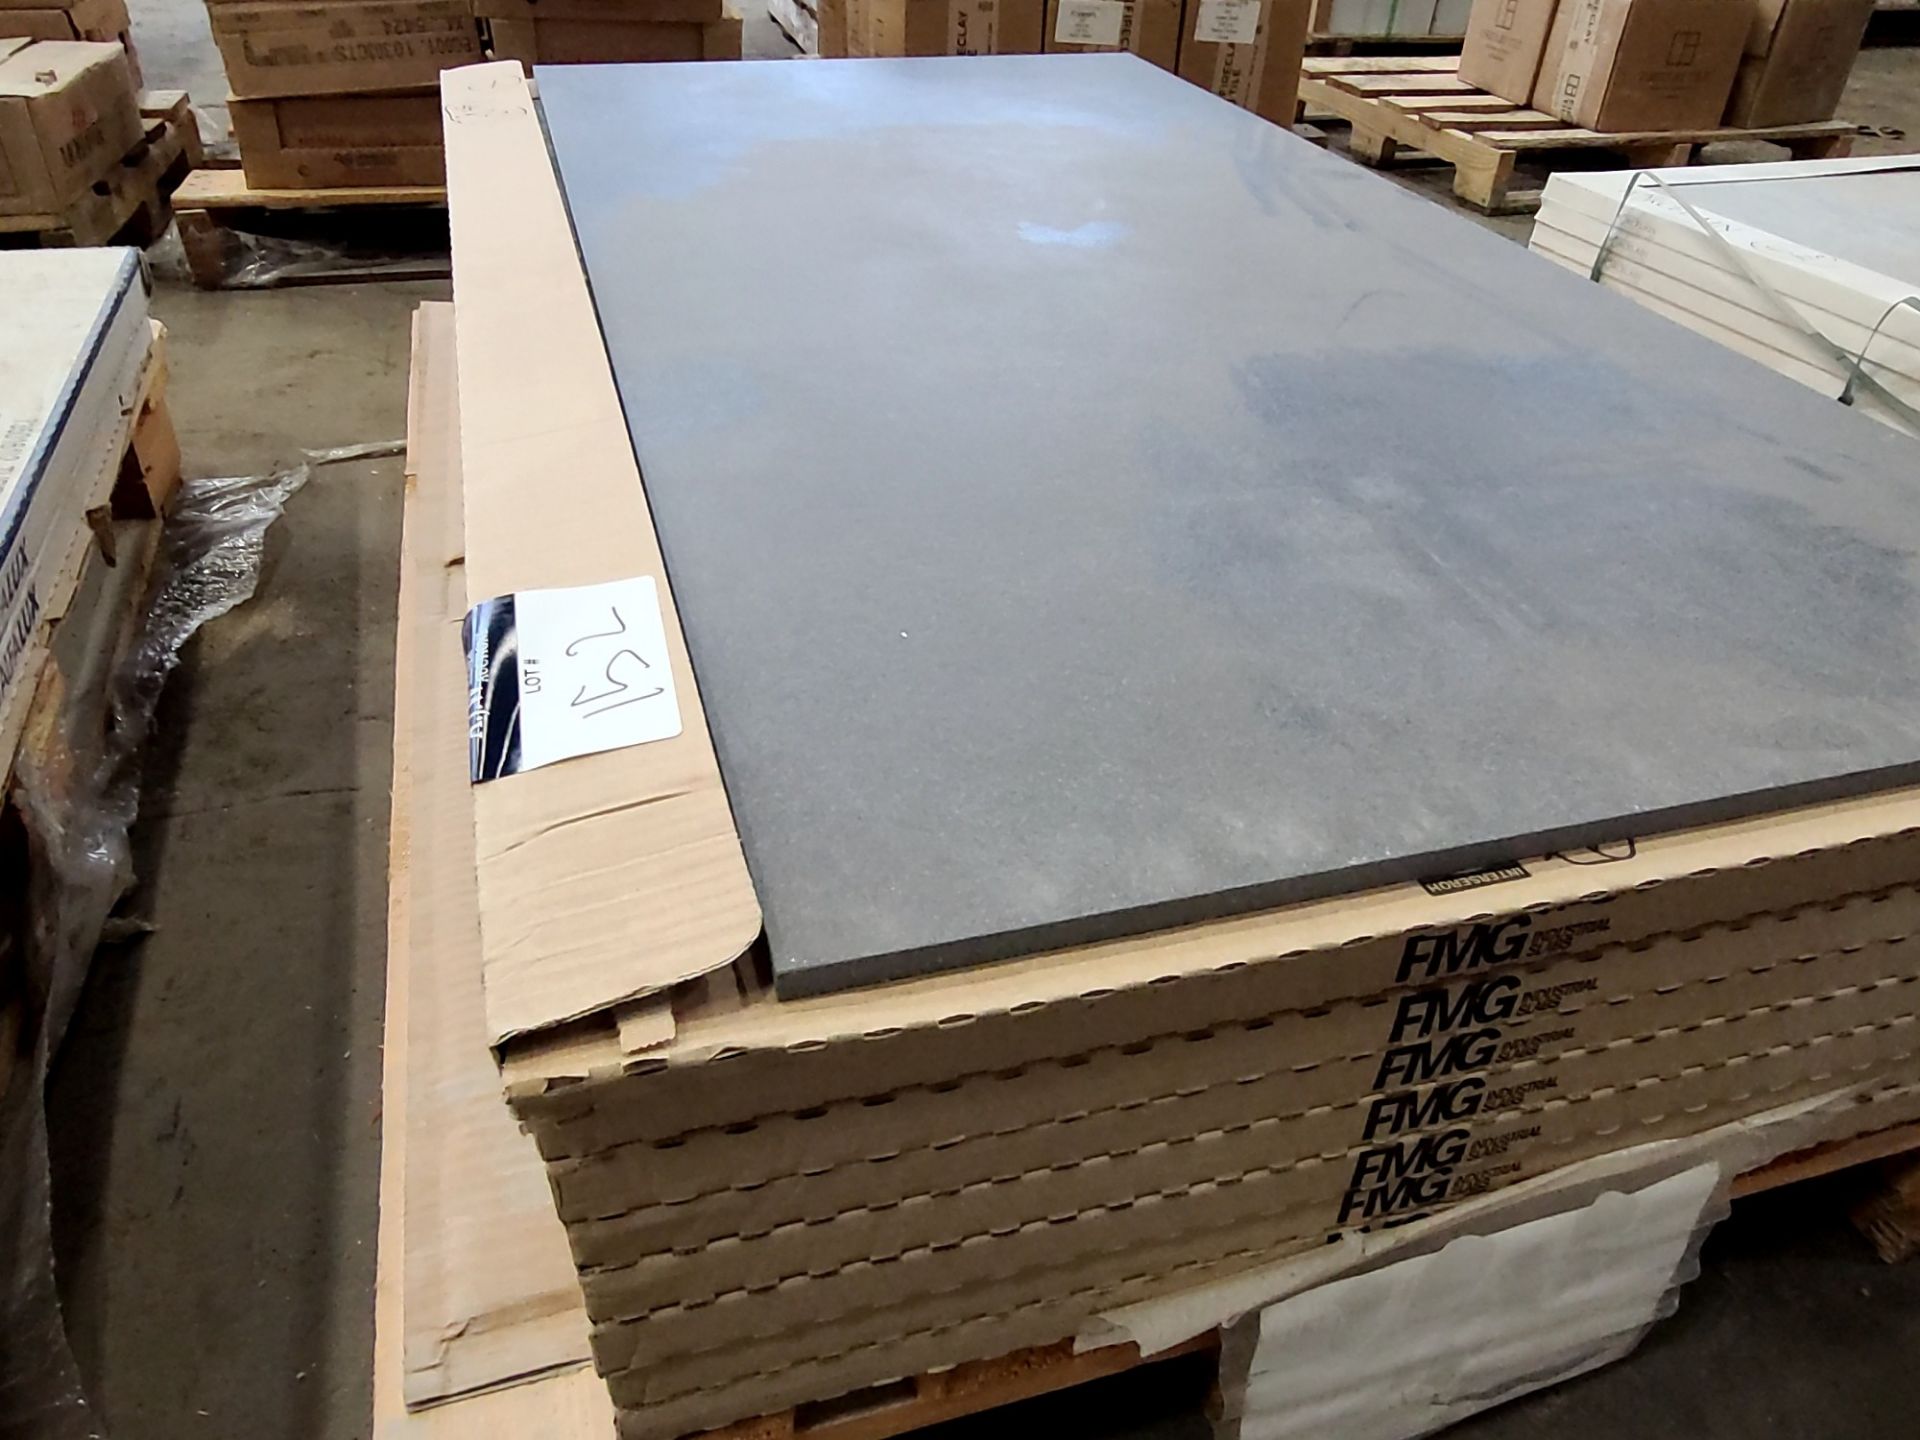 [sq ft] FMG Industrial Slabs 23 1/2" x 47" Abstract Grey